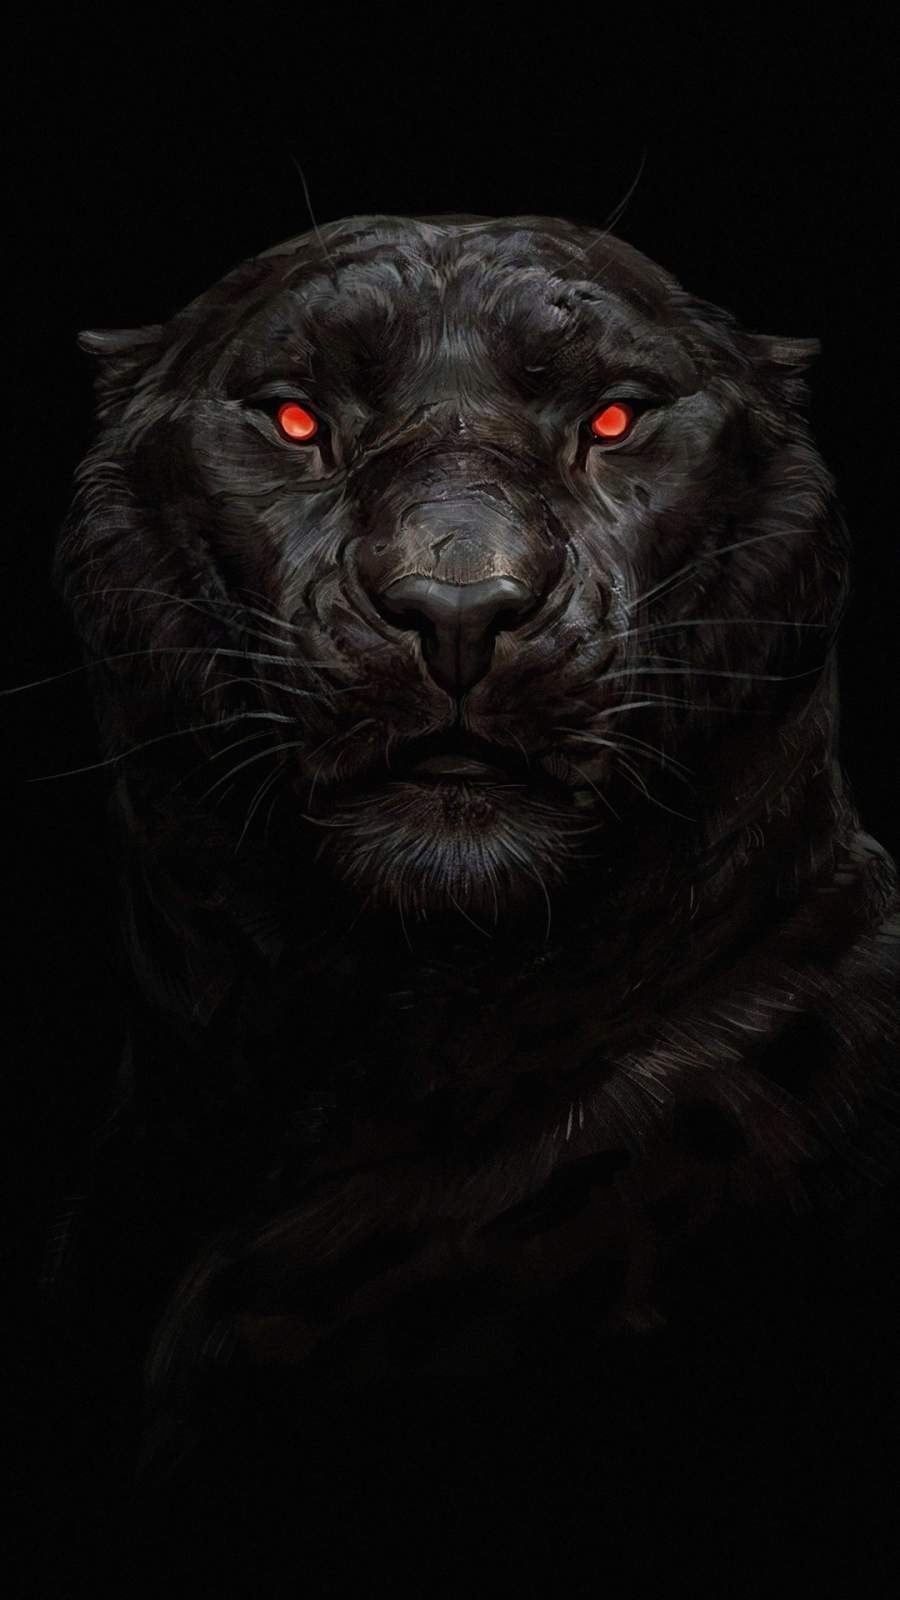 Black-Panther-Glowing-Eye-Iphone-Wallpaper - Iphone Wallpapers : Iphone